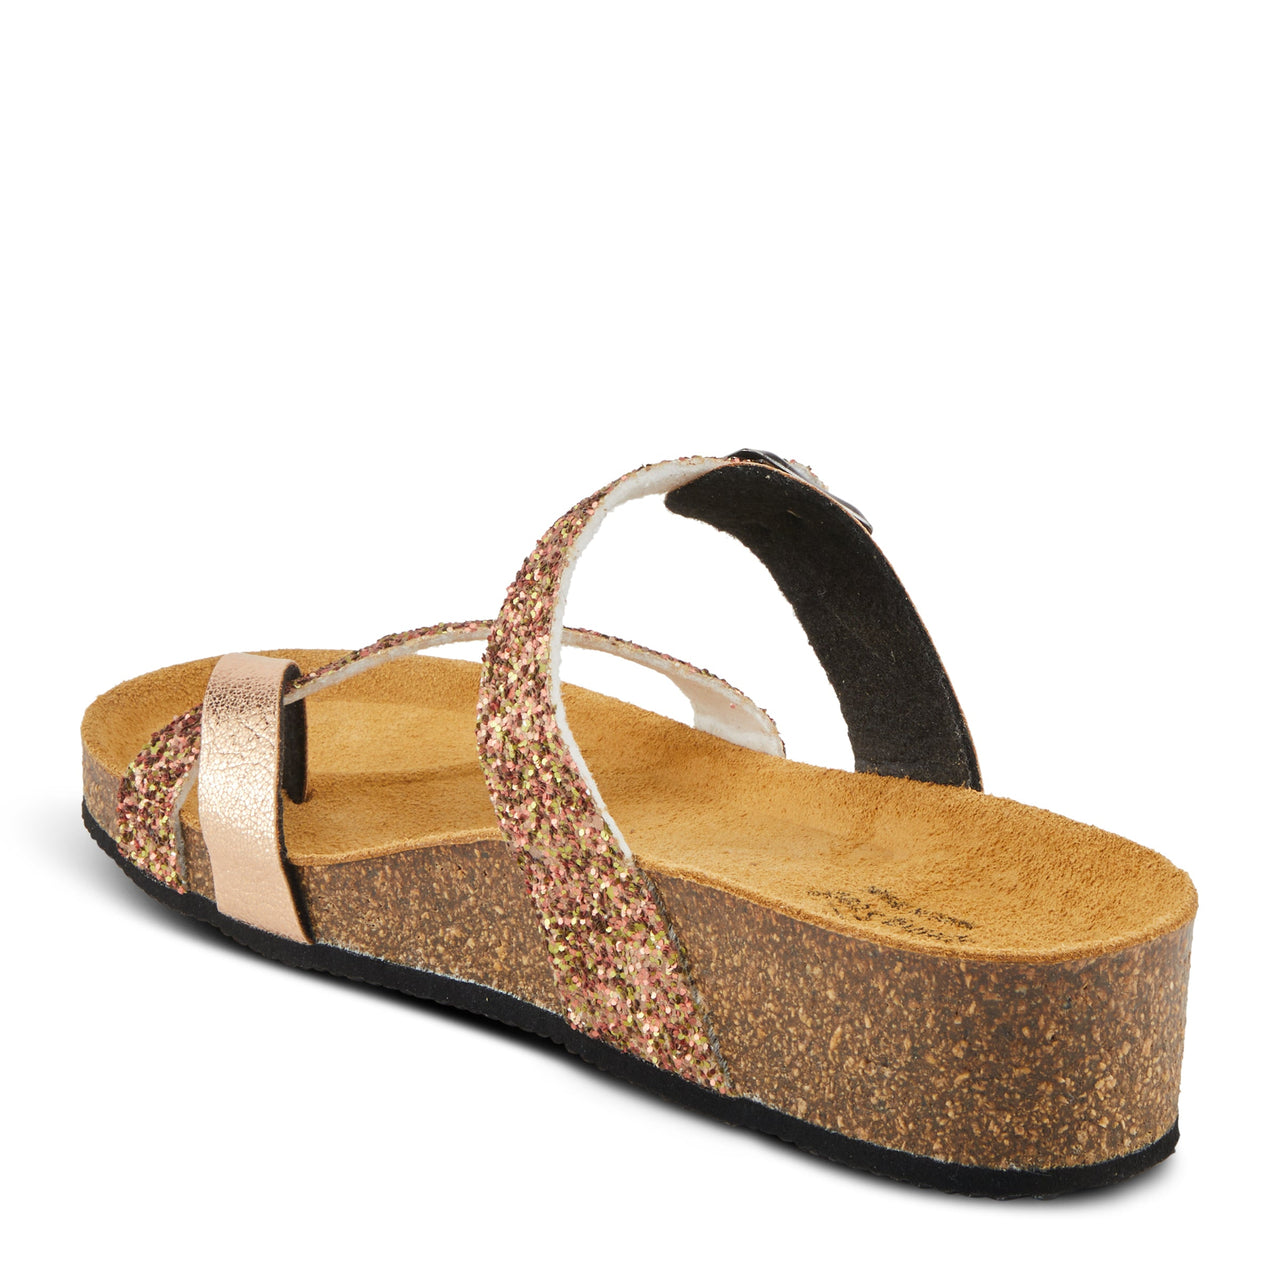 Casual and trendy Spring Step Burch Sandals in tan leather with decorative metal studs